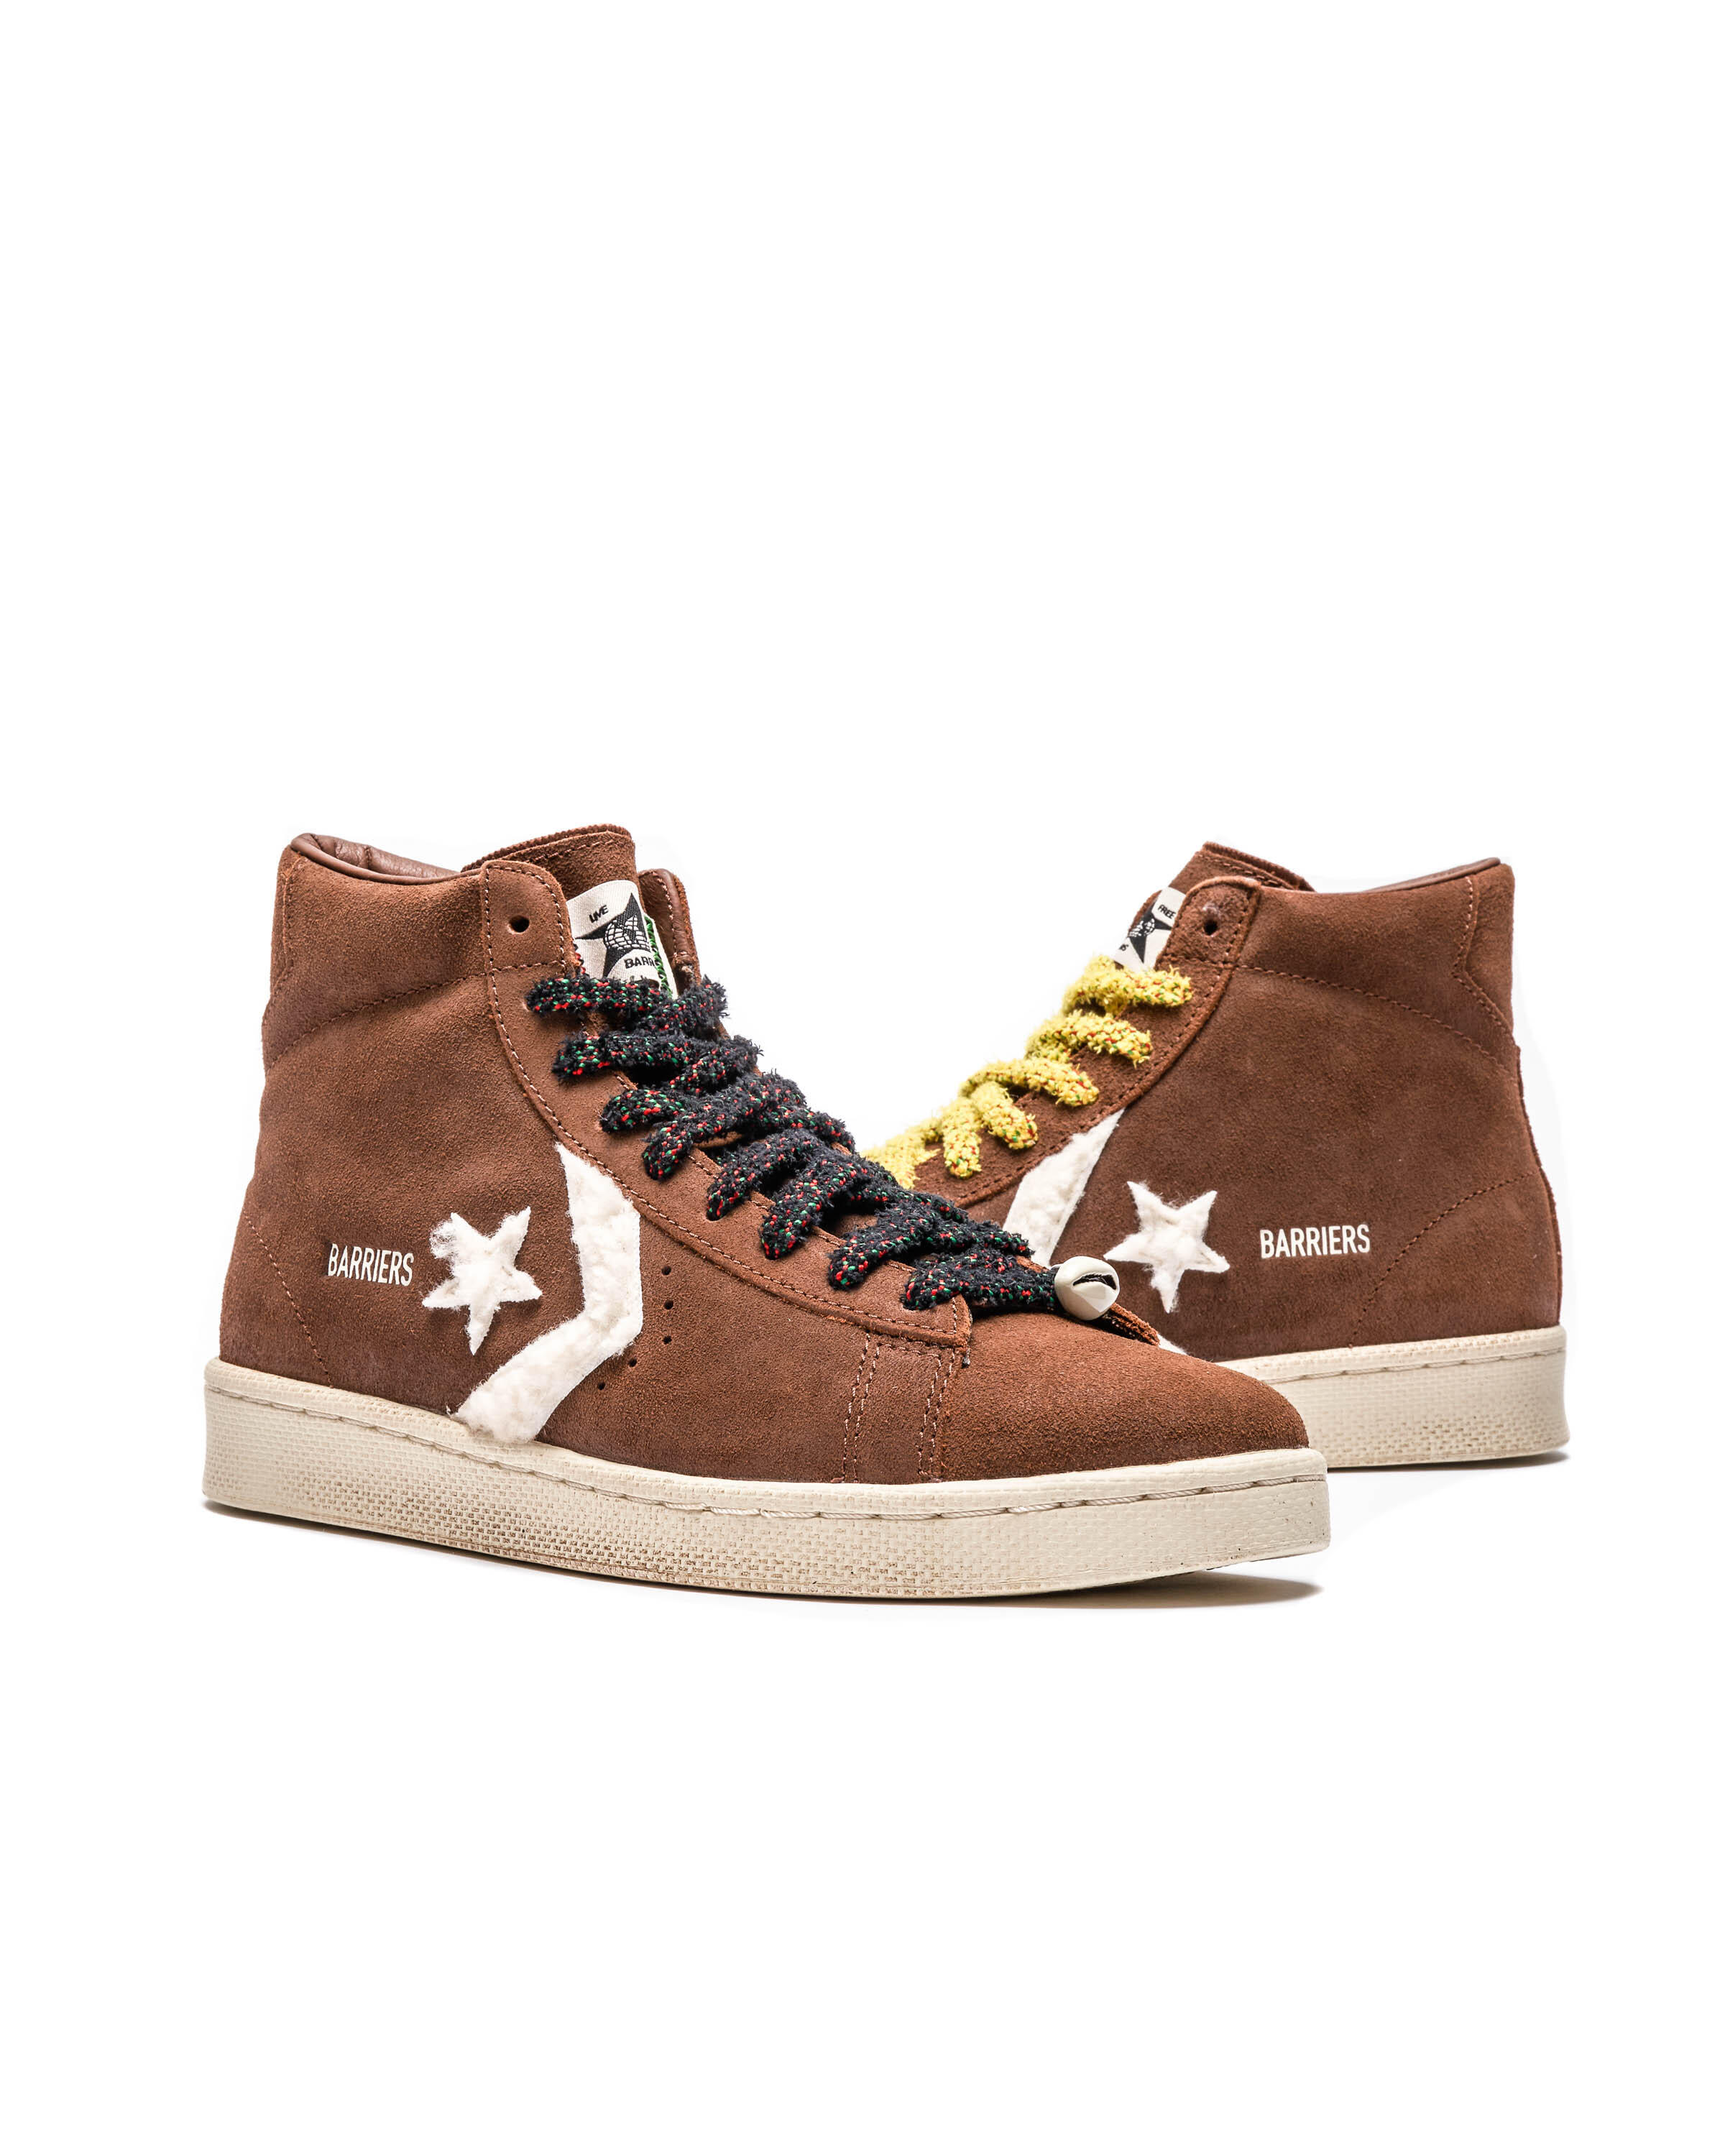 Converse x Barriers Pro Leather Hi